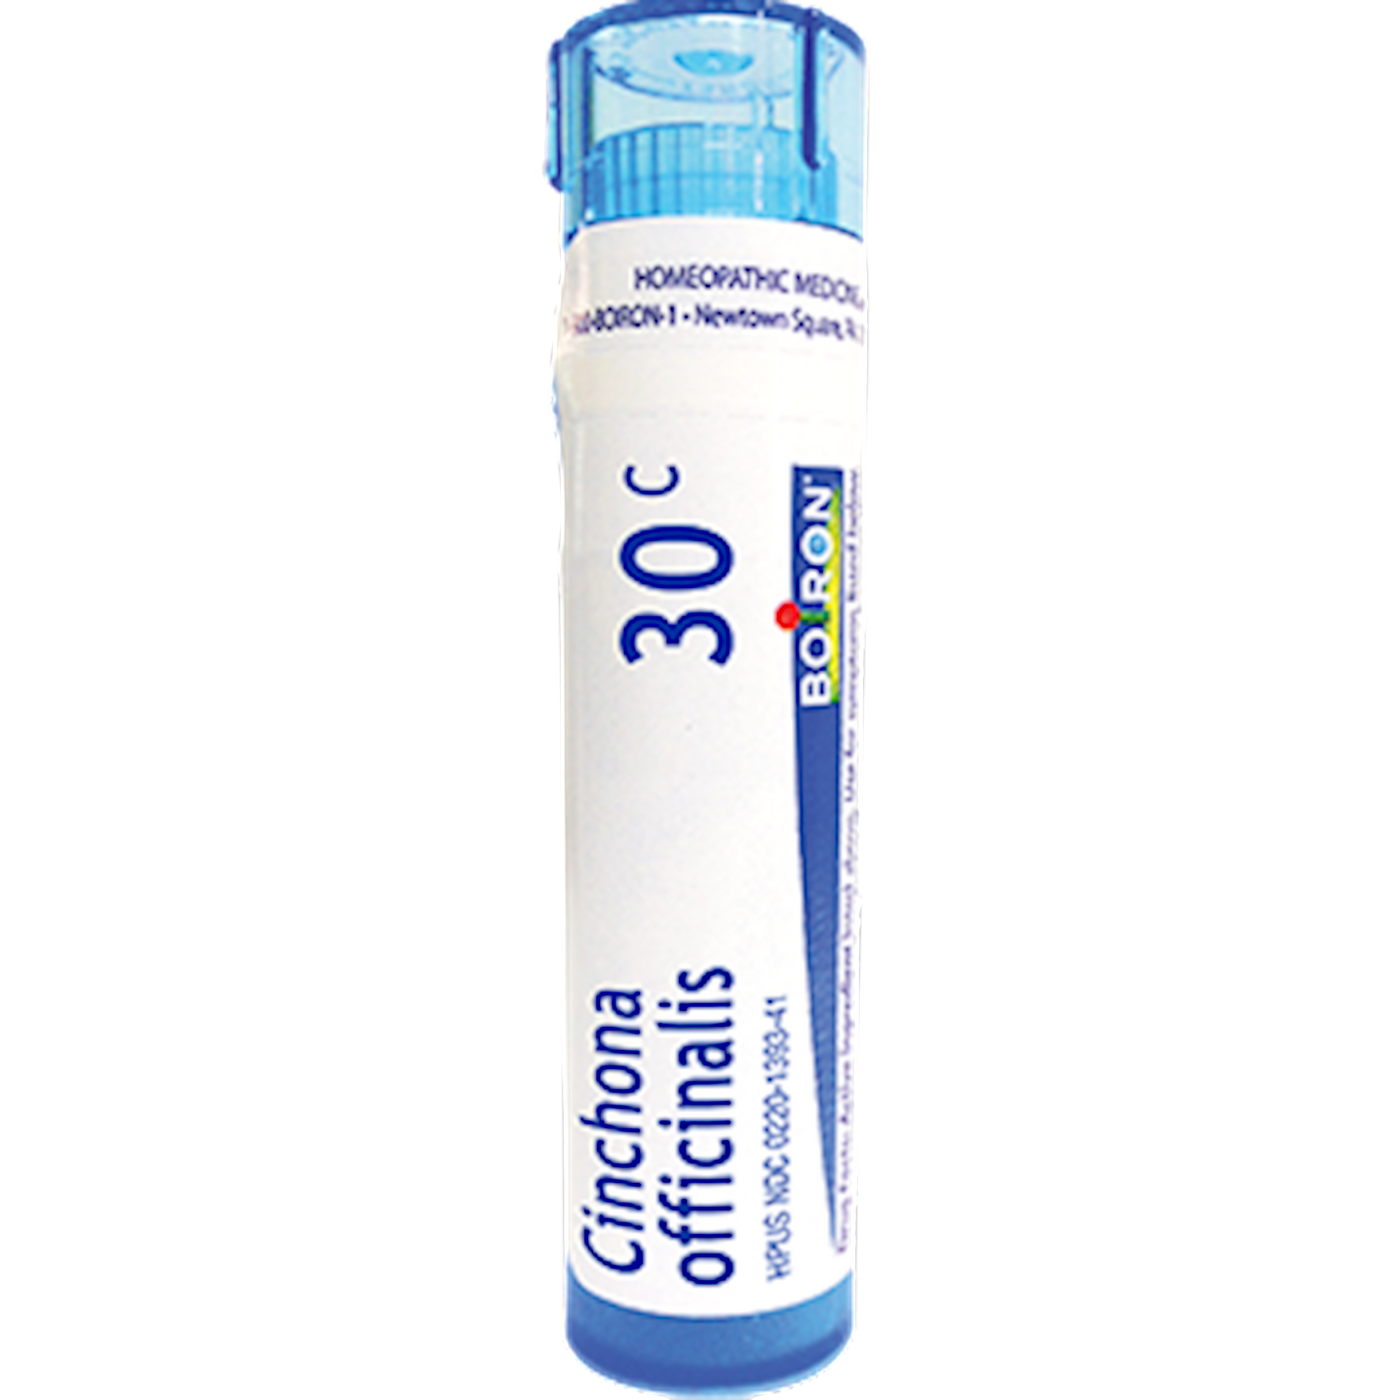 Cinchona officinalis 30C 80 plts Curated Wellness